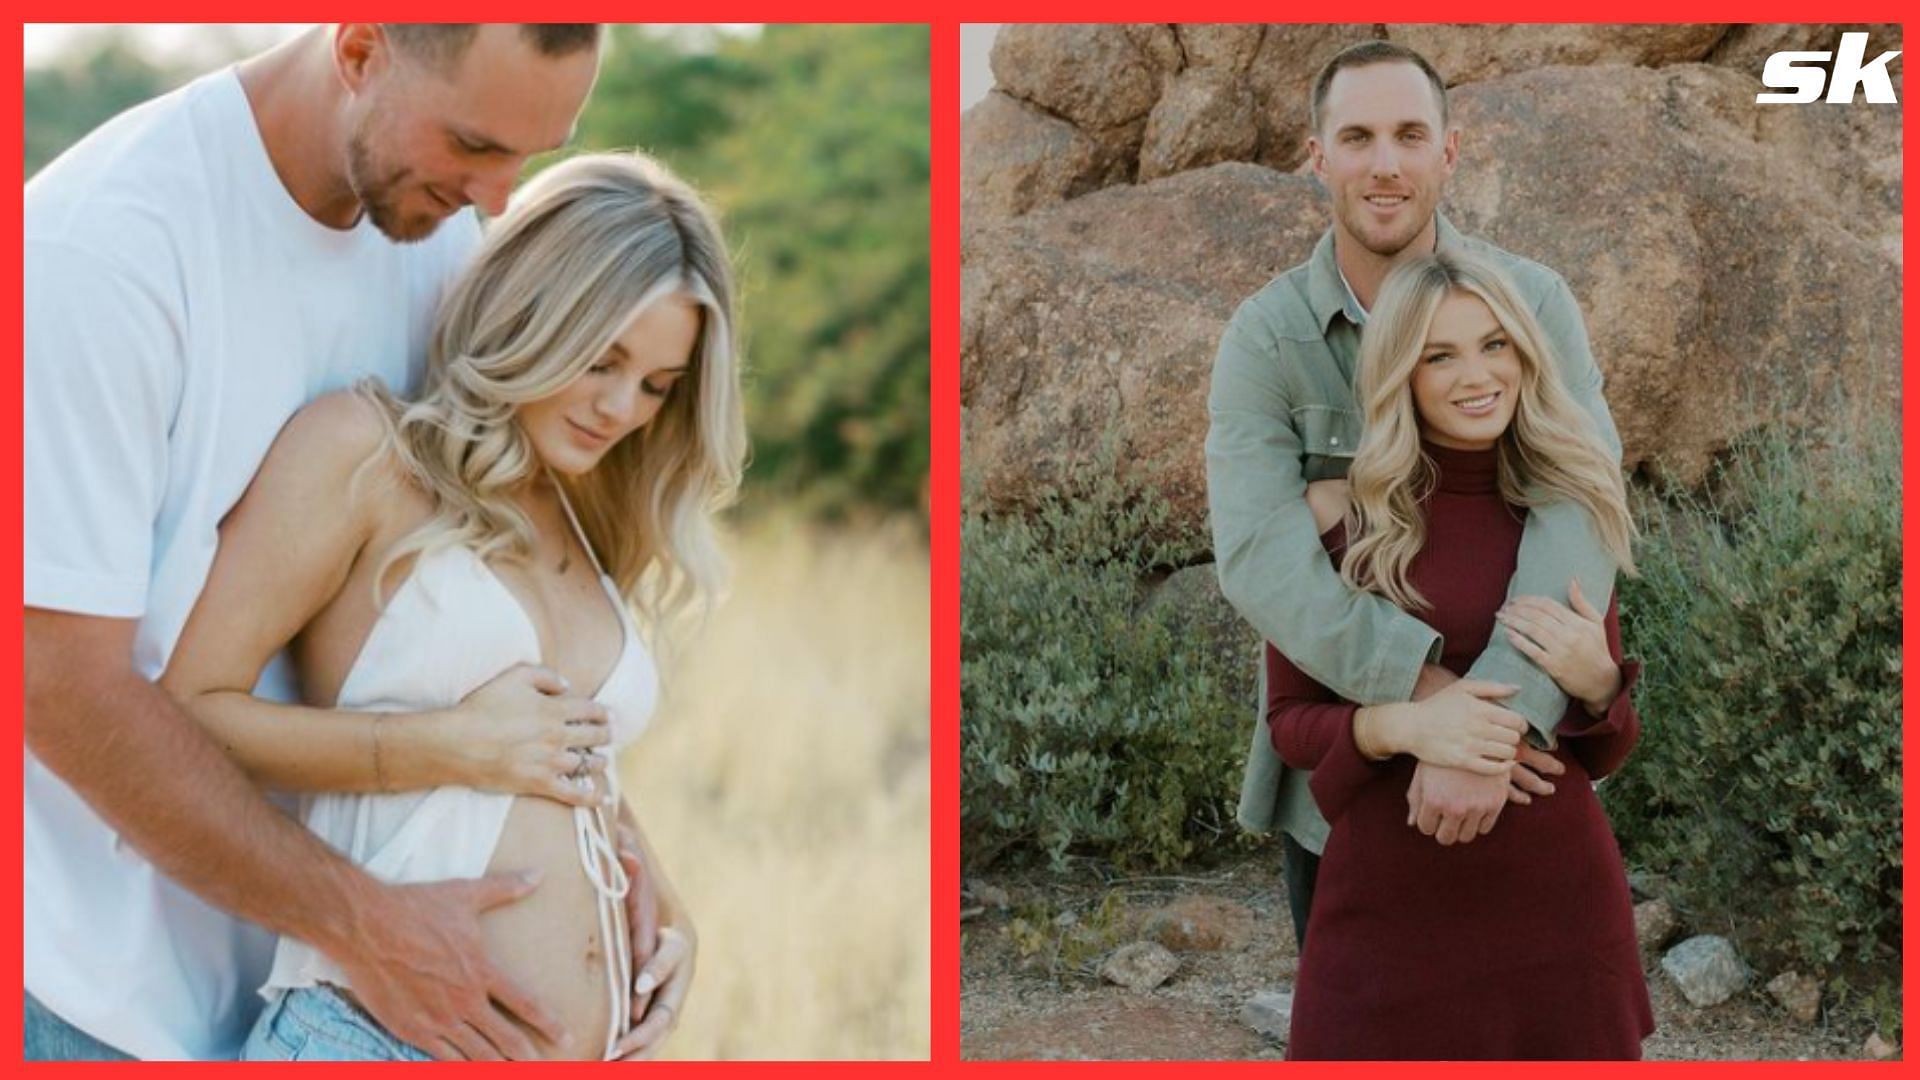 Patrick Murphy: Fans rejoice as MLB pitcher Patrick Murphy and fiancee  Landin reveal their baby's gender